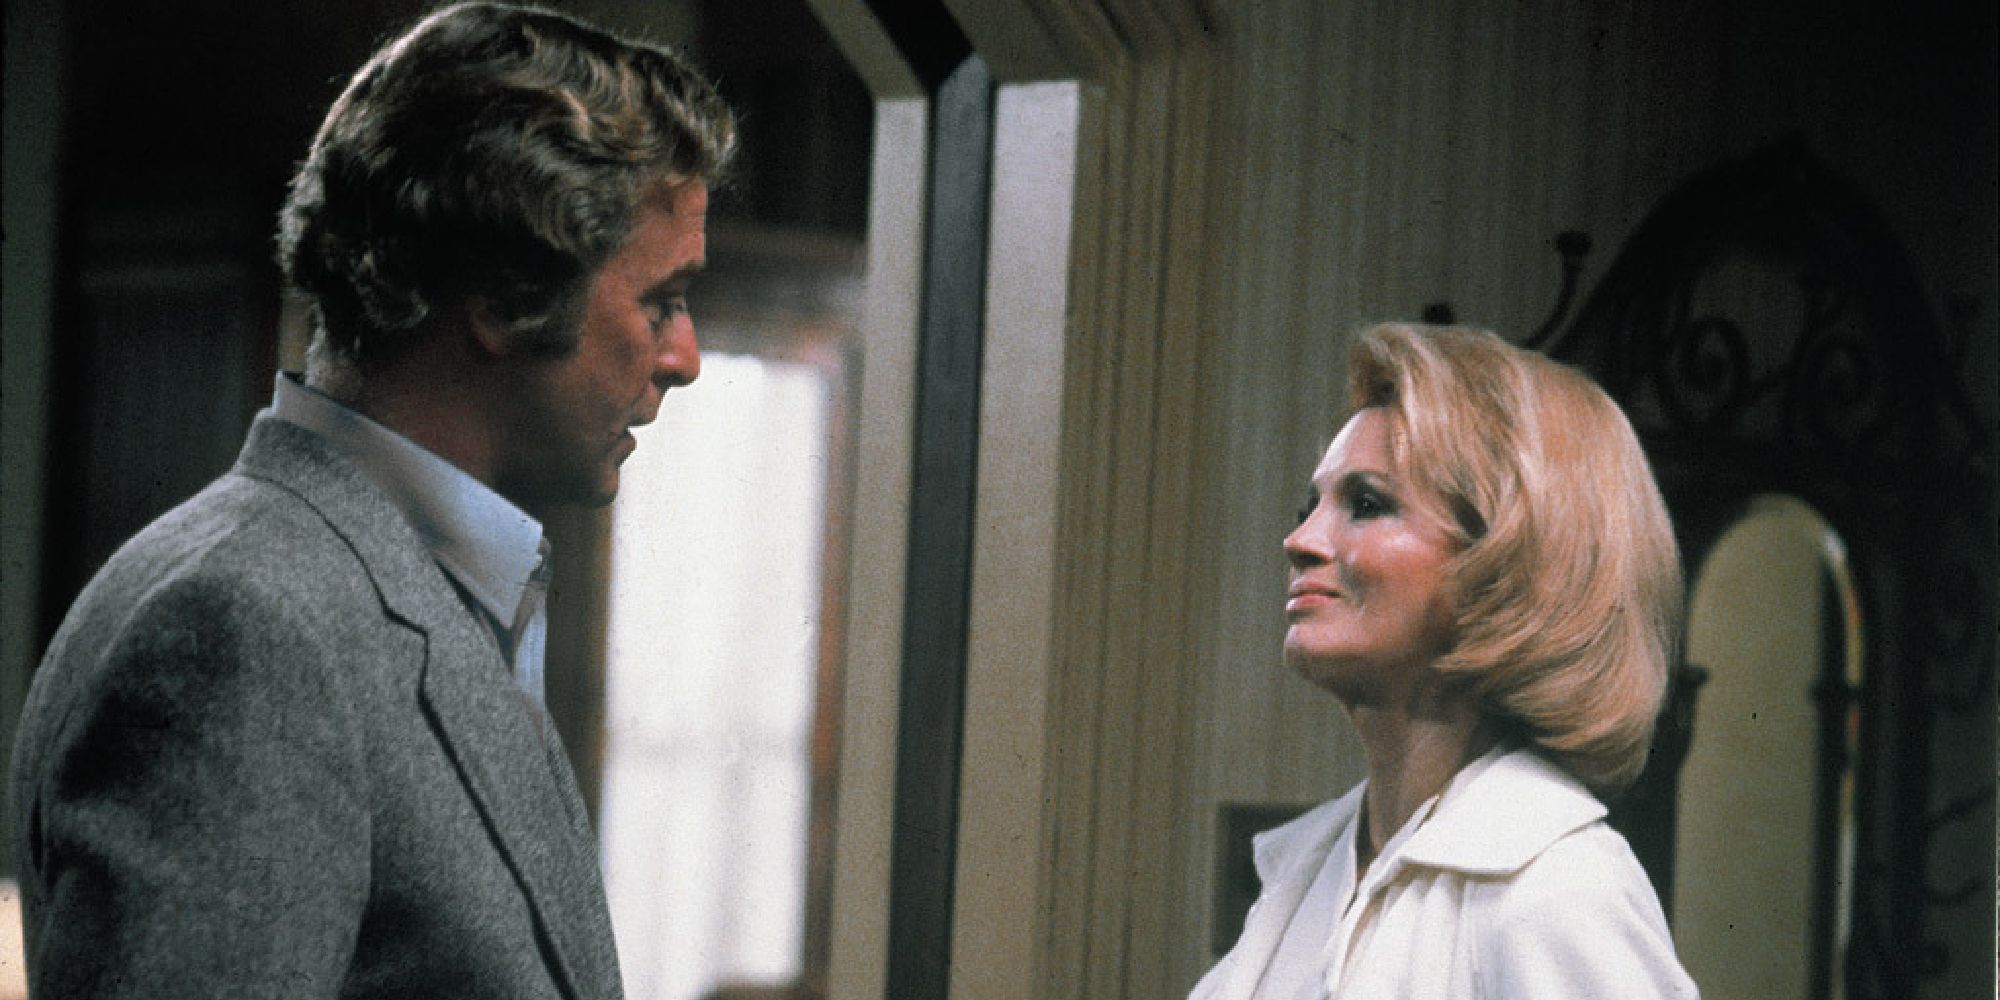 Michael Caine and Nancy Allen in Dressed to Kill - 1980